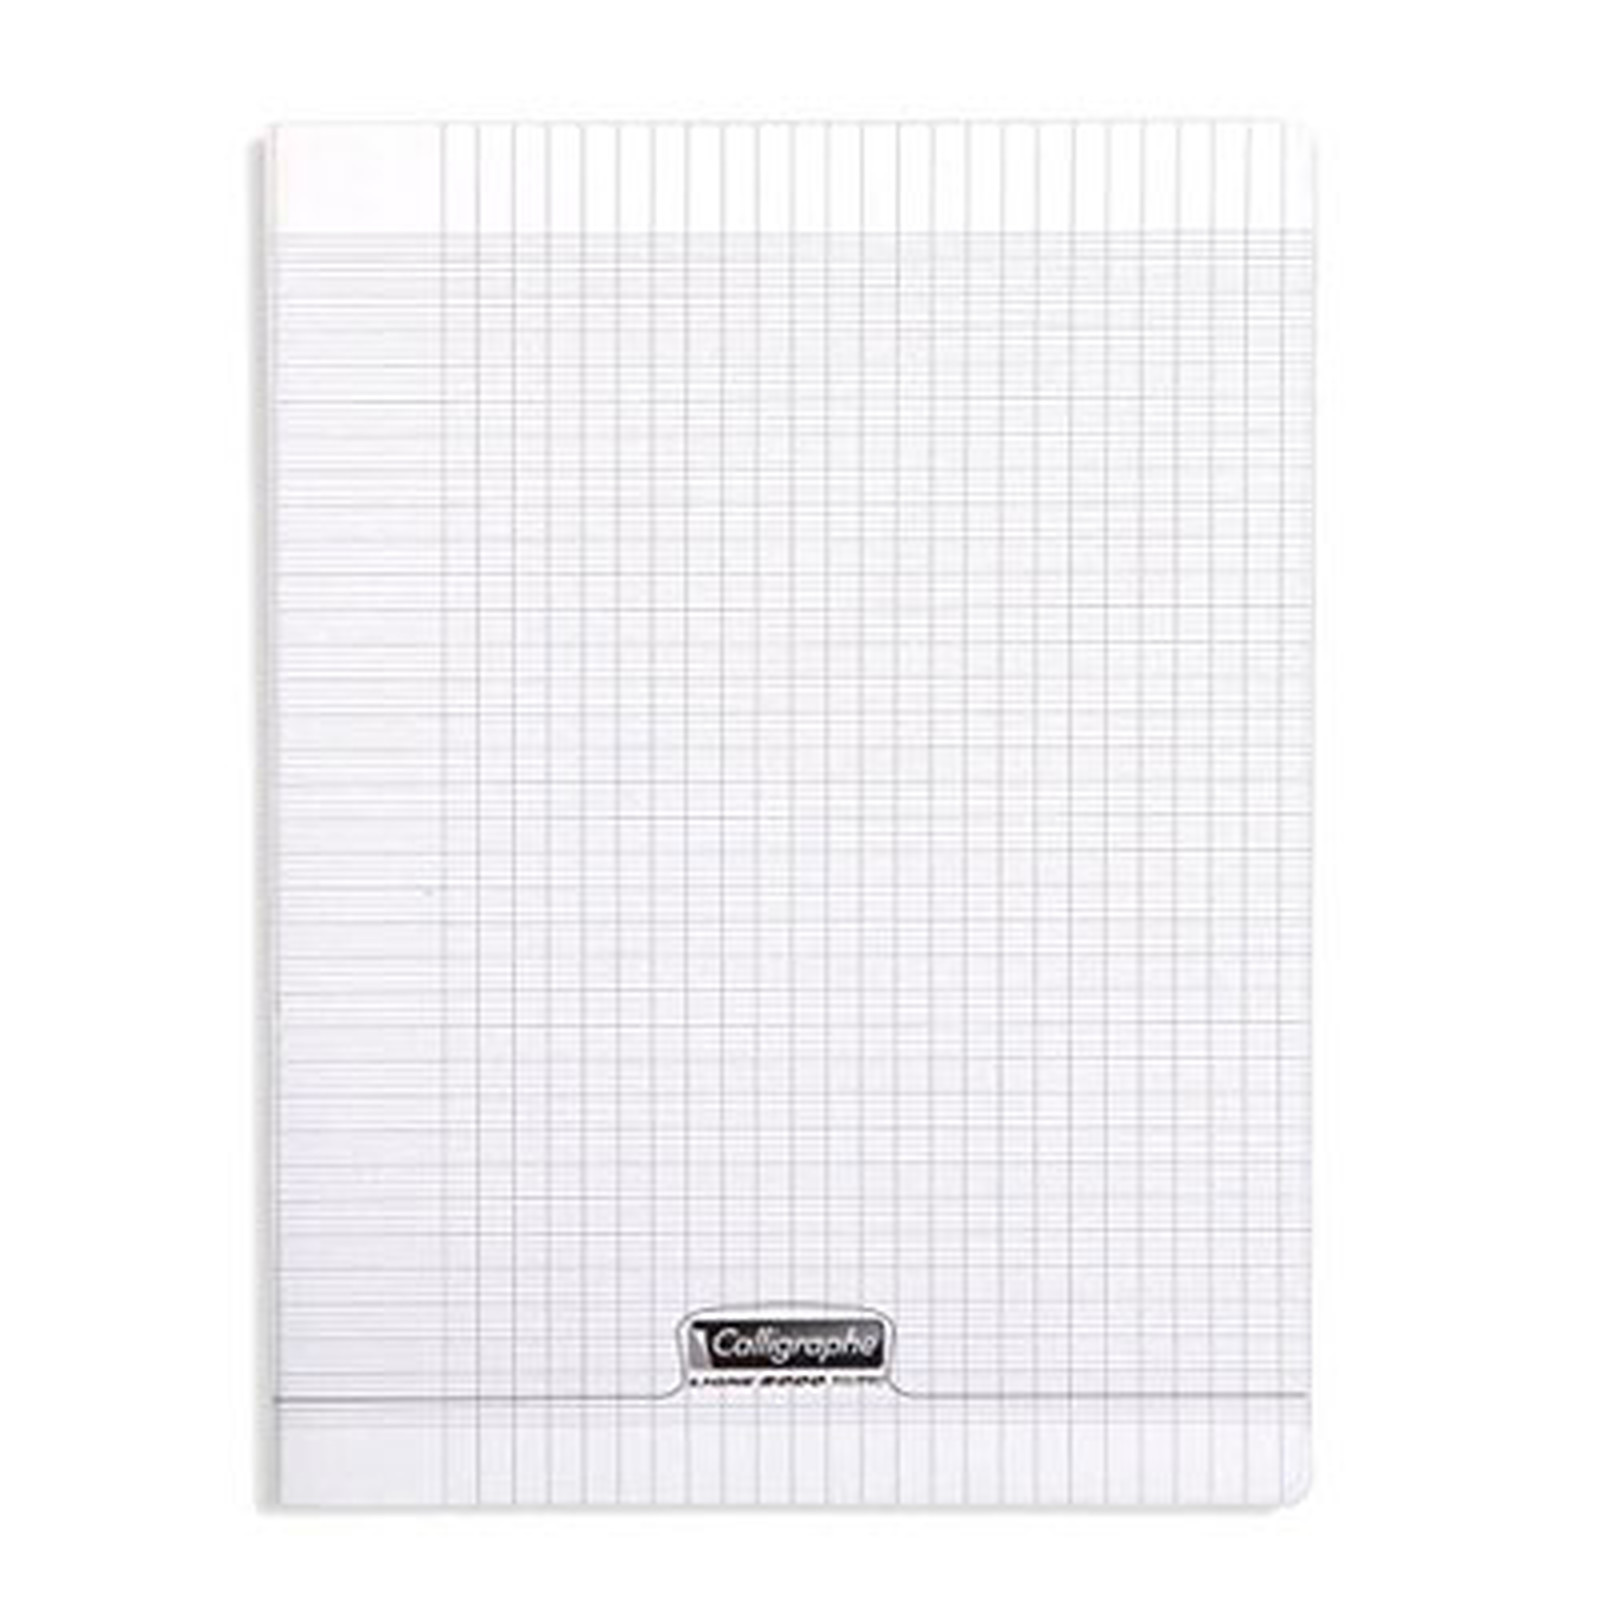 Calligraphe 8000 Polypro Cahier 96 pages 24 x 32 cm seyes grands carreaux Incolore - Cahier Calligraphe